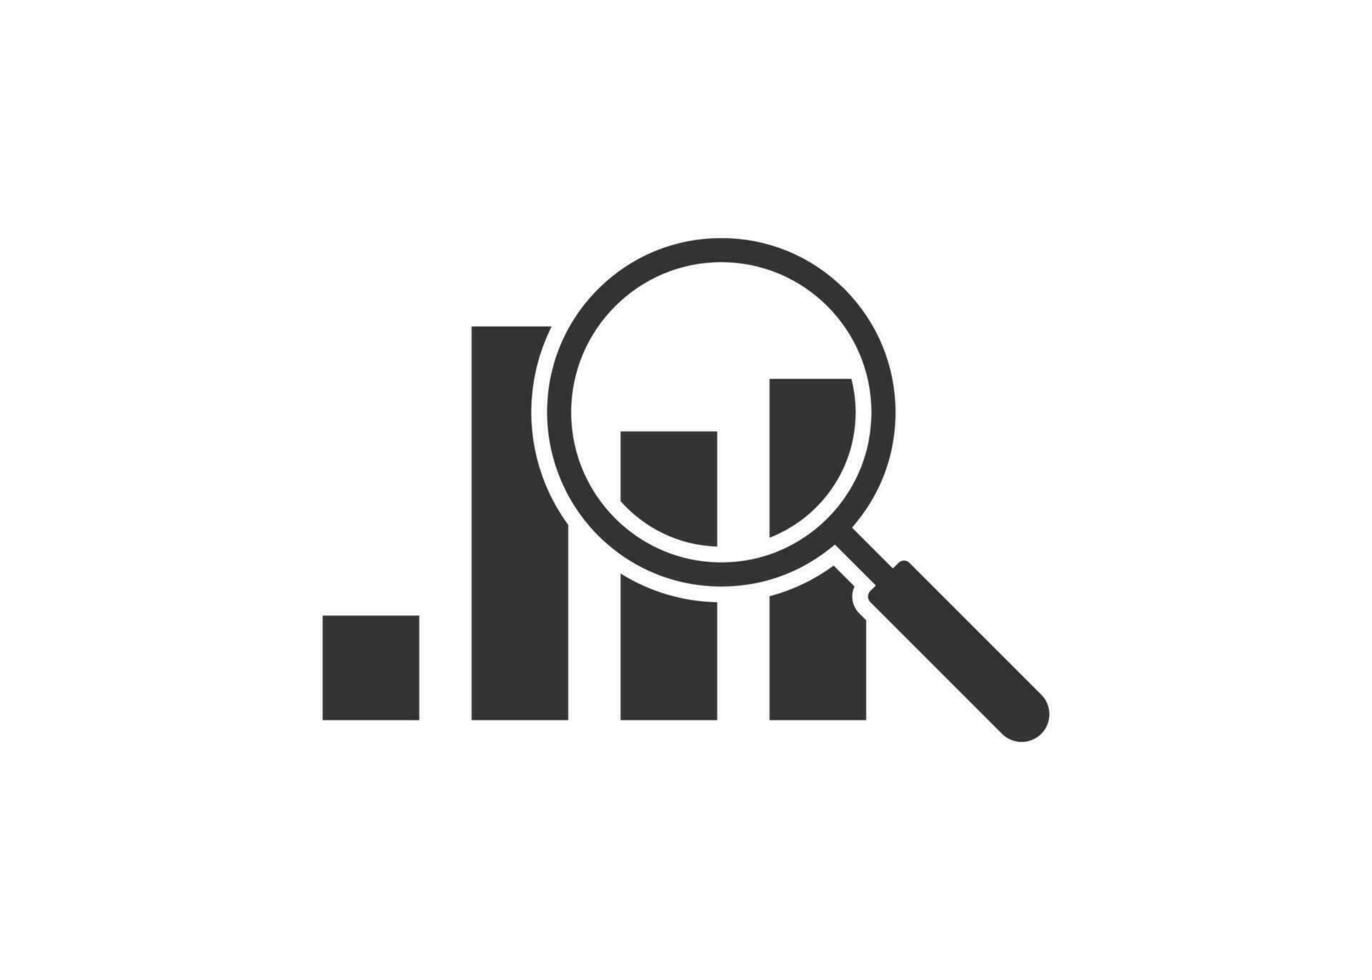 Magnifier and graph icon. Research illustration symbol. Sign bussines verification vector